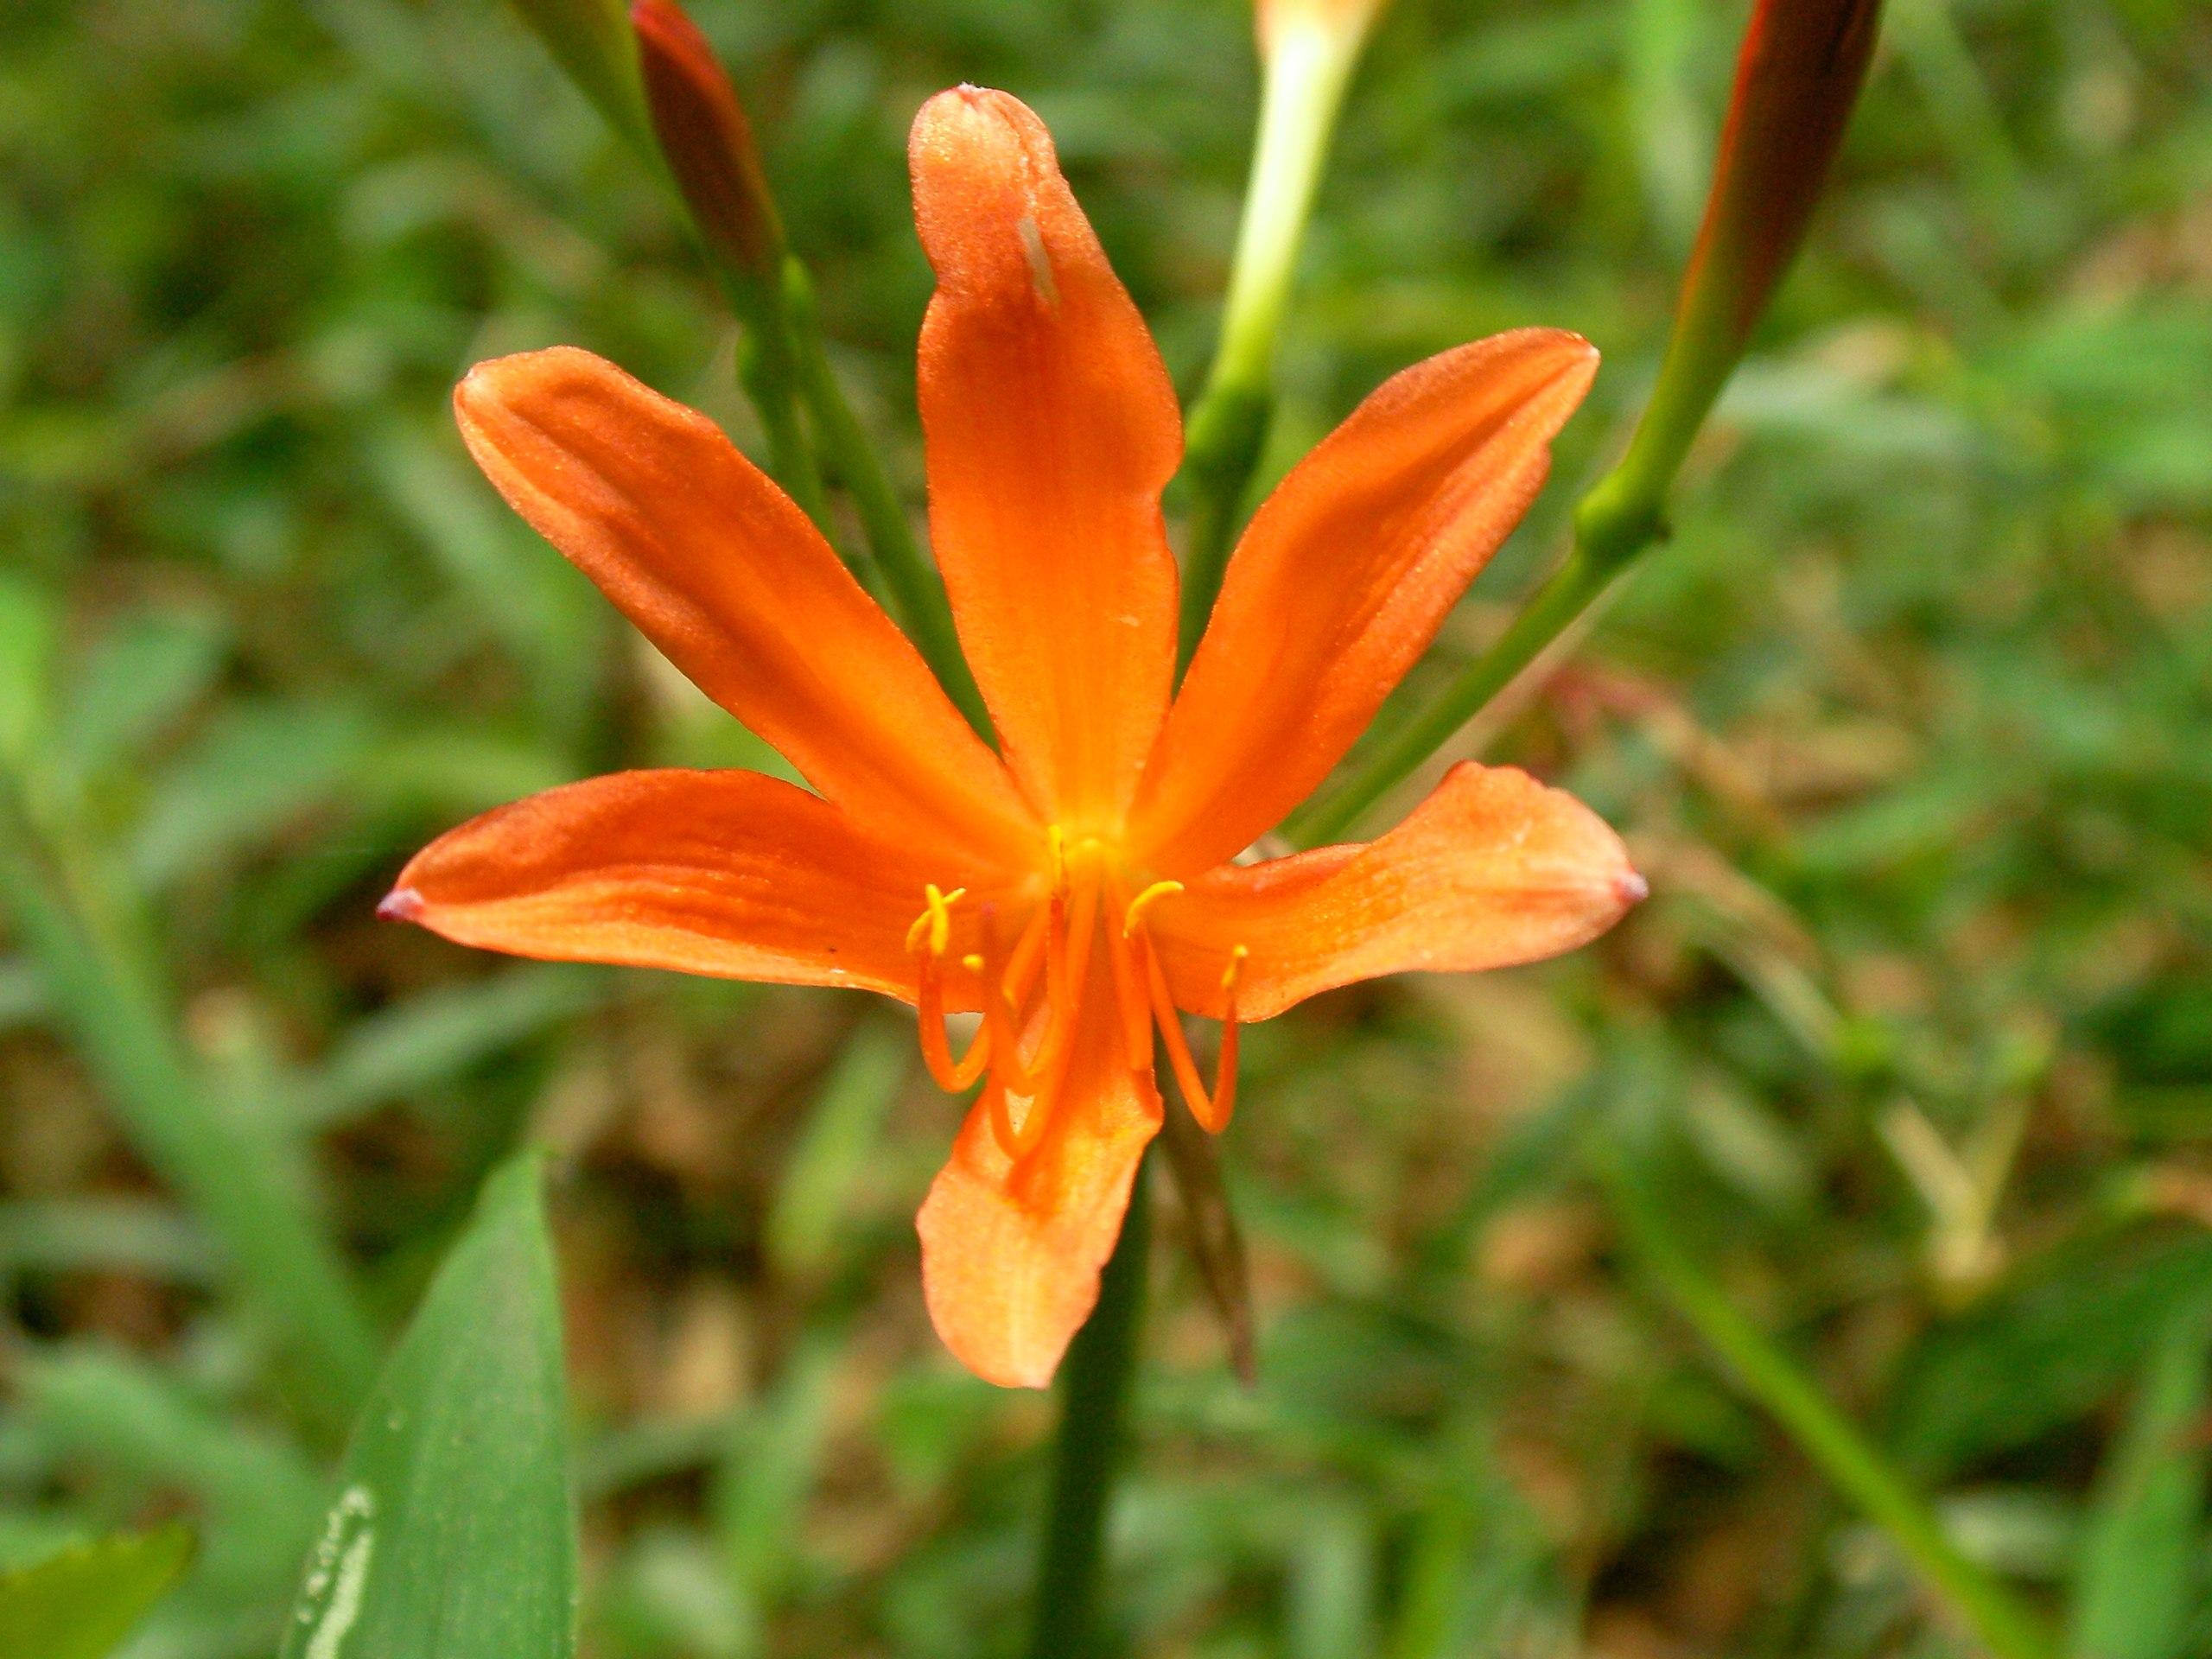 Orange flower with filament and yellow anther, dark-orange buds, green pedicel and stem.